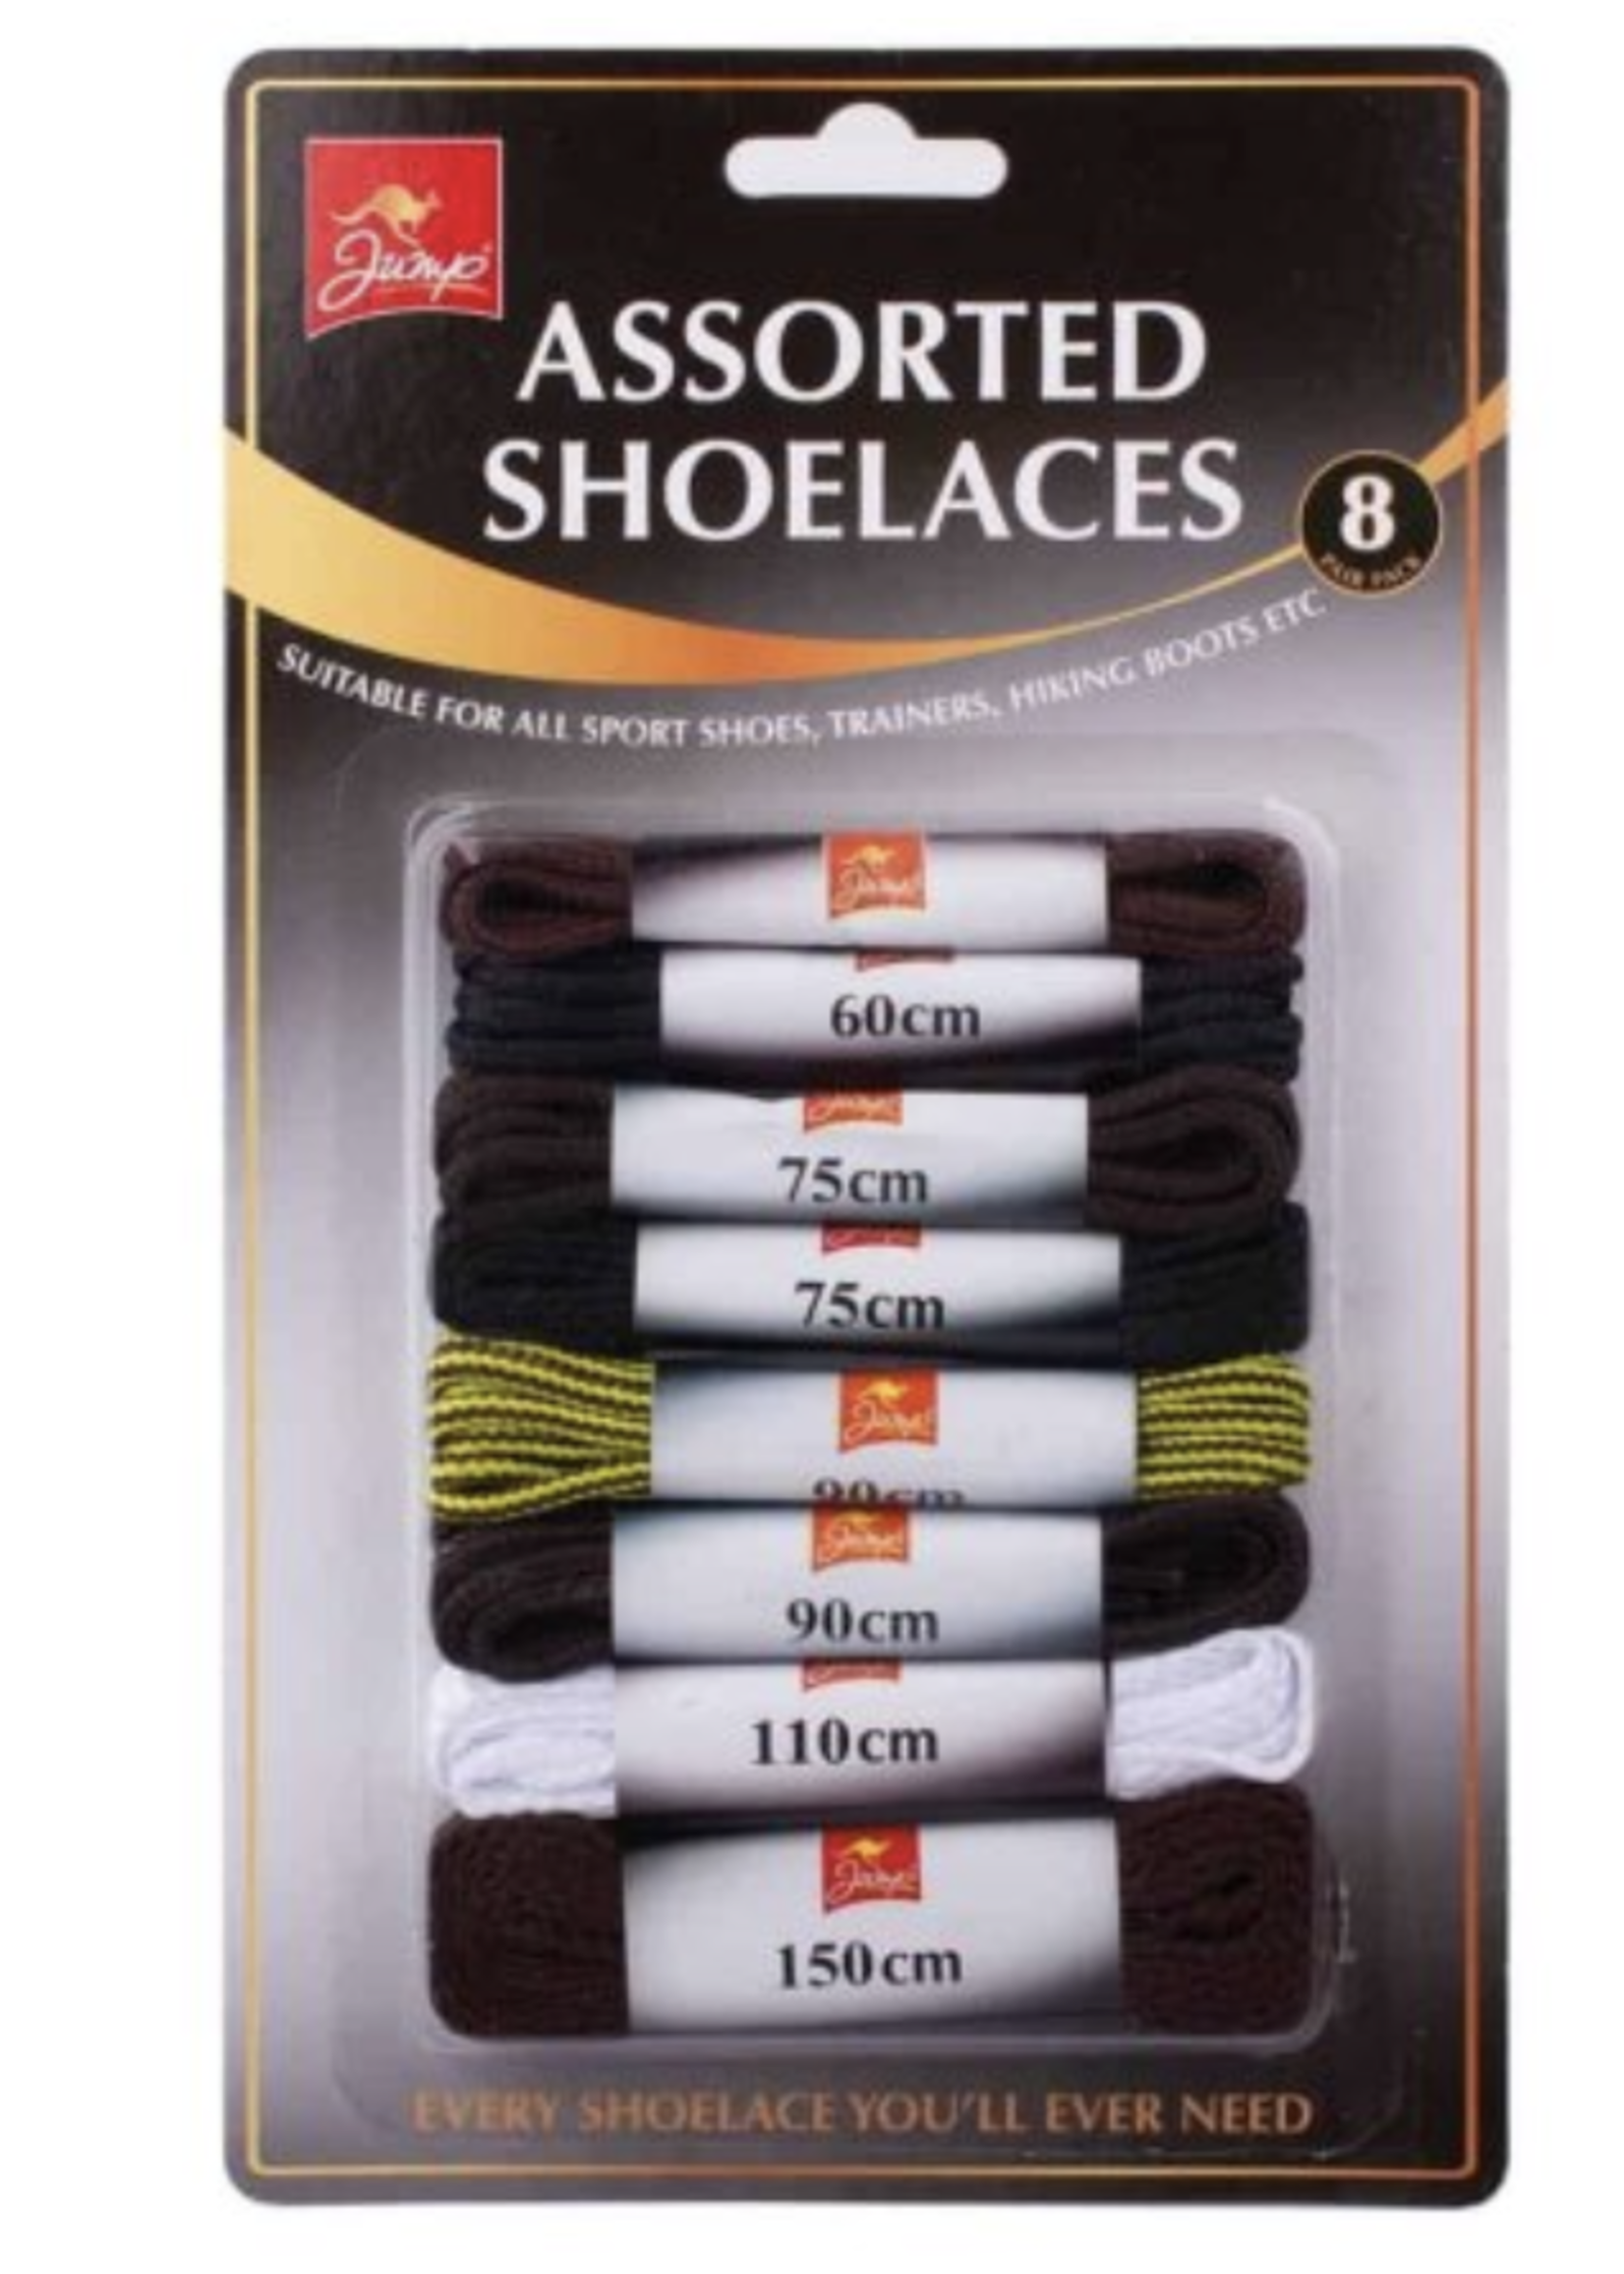 151 Shoe Laces Assorted 8 Pack